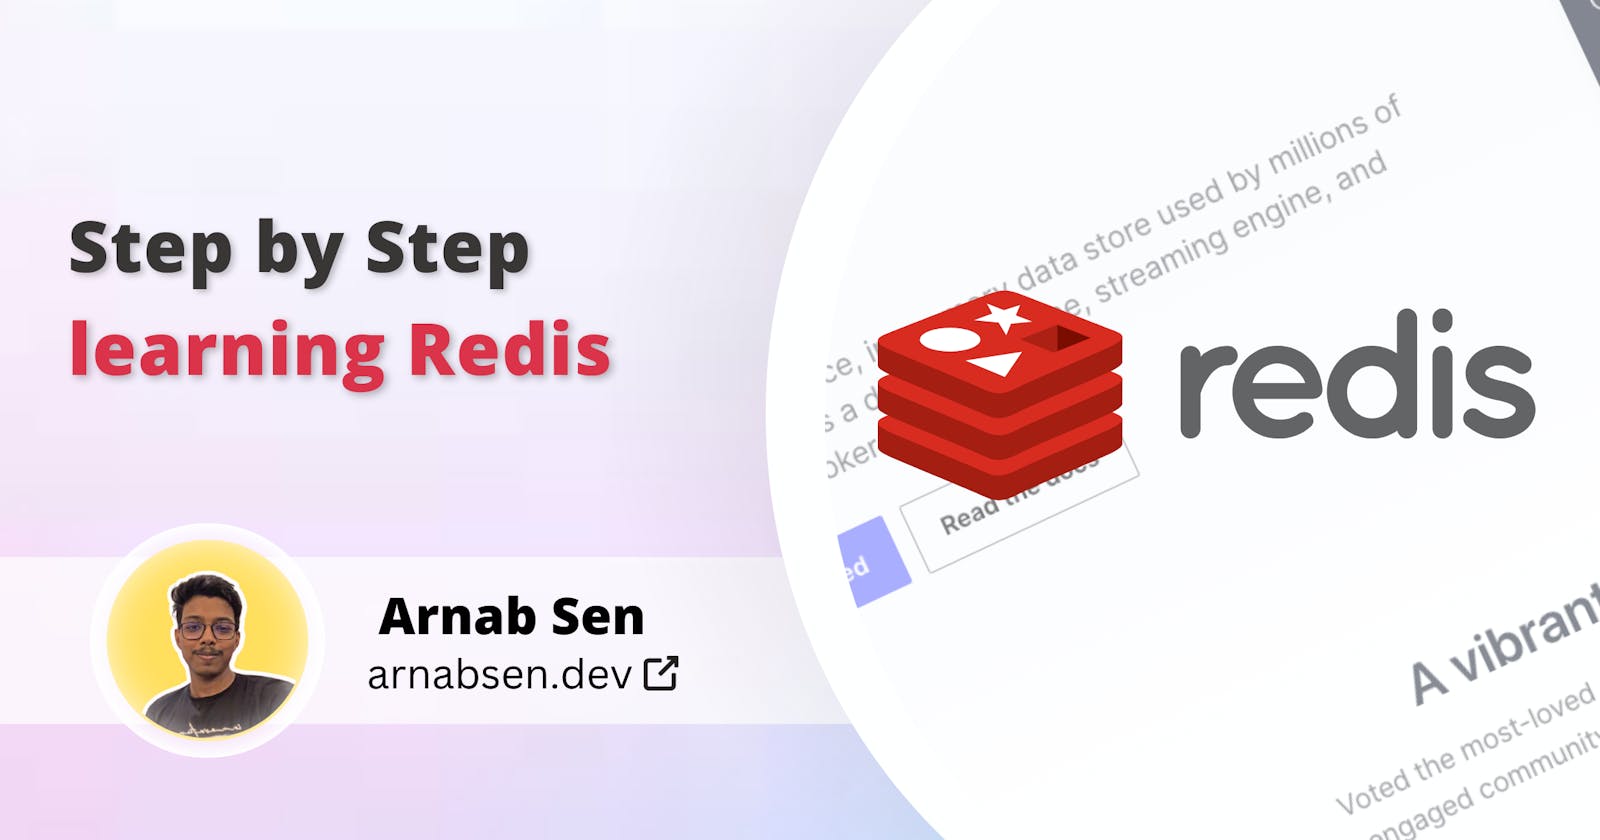 Step by Step learning Redis